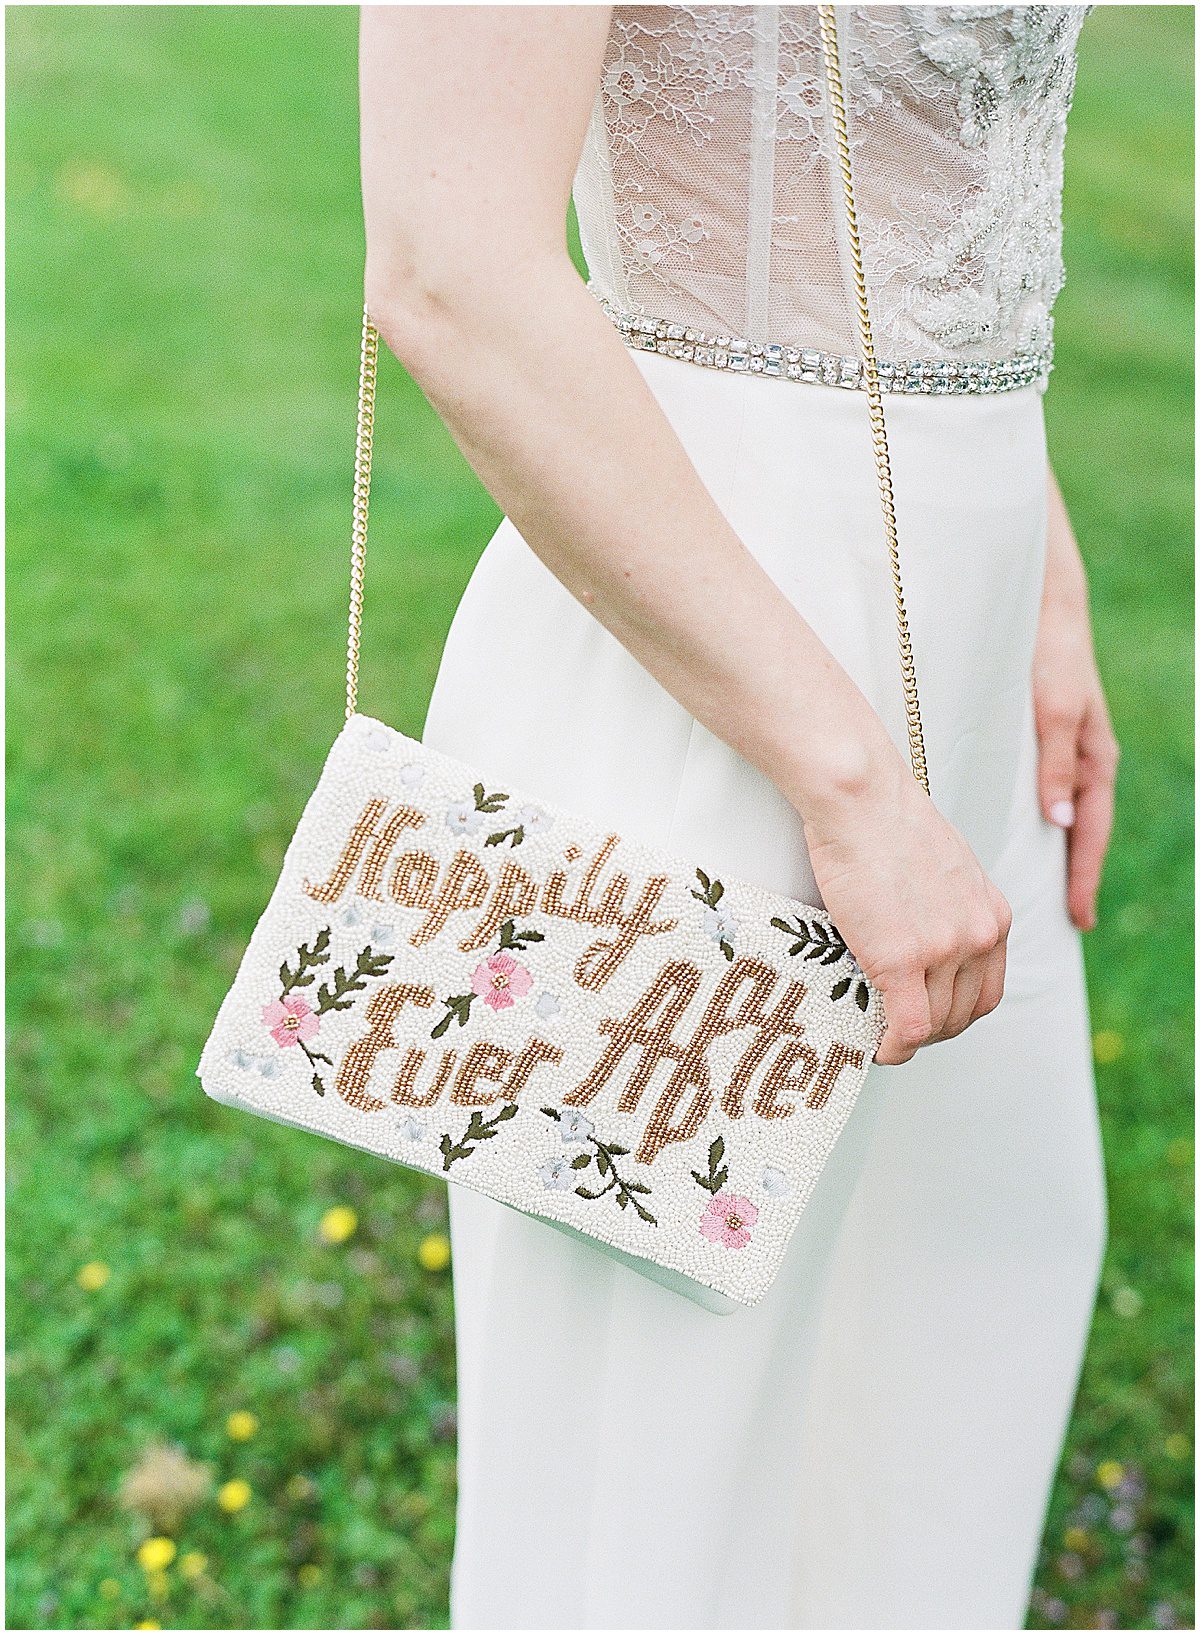 Brides Happily Ever After Beaded Clutch Photo